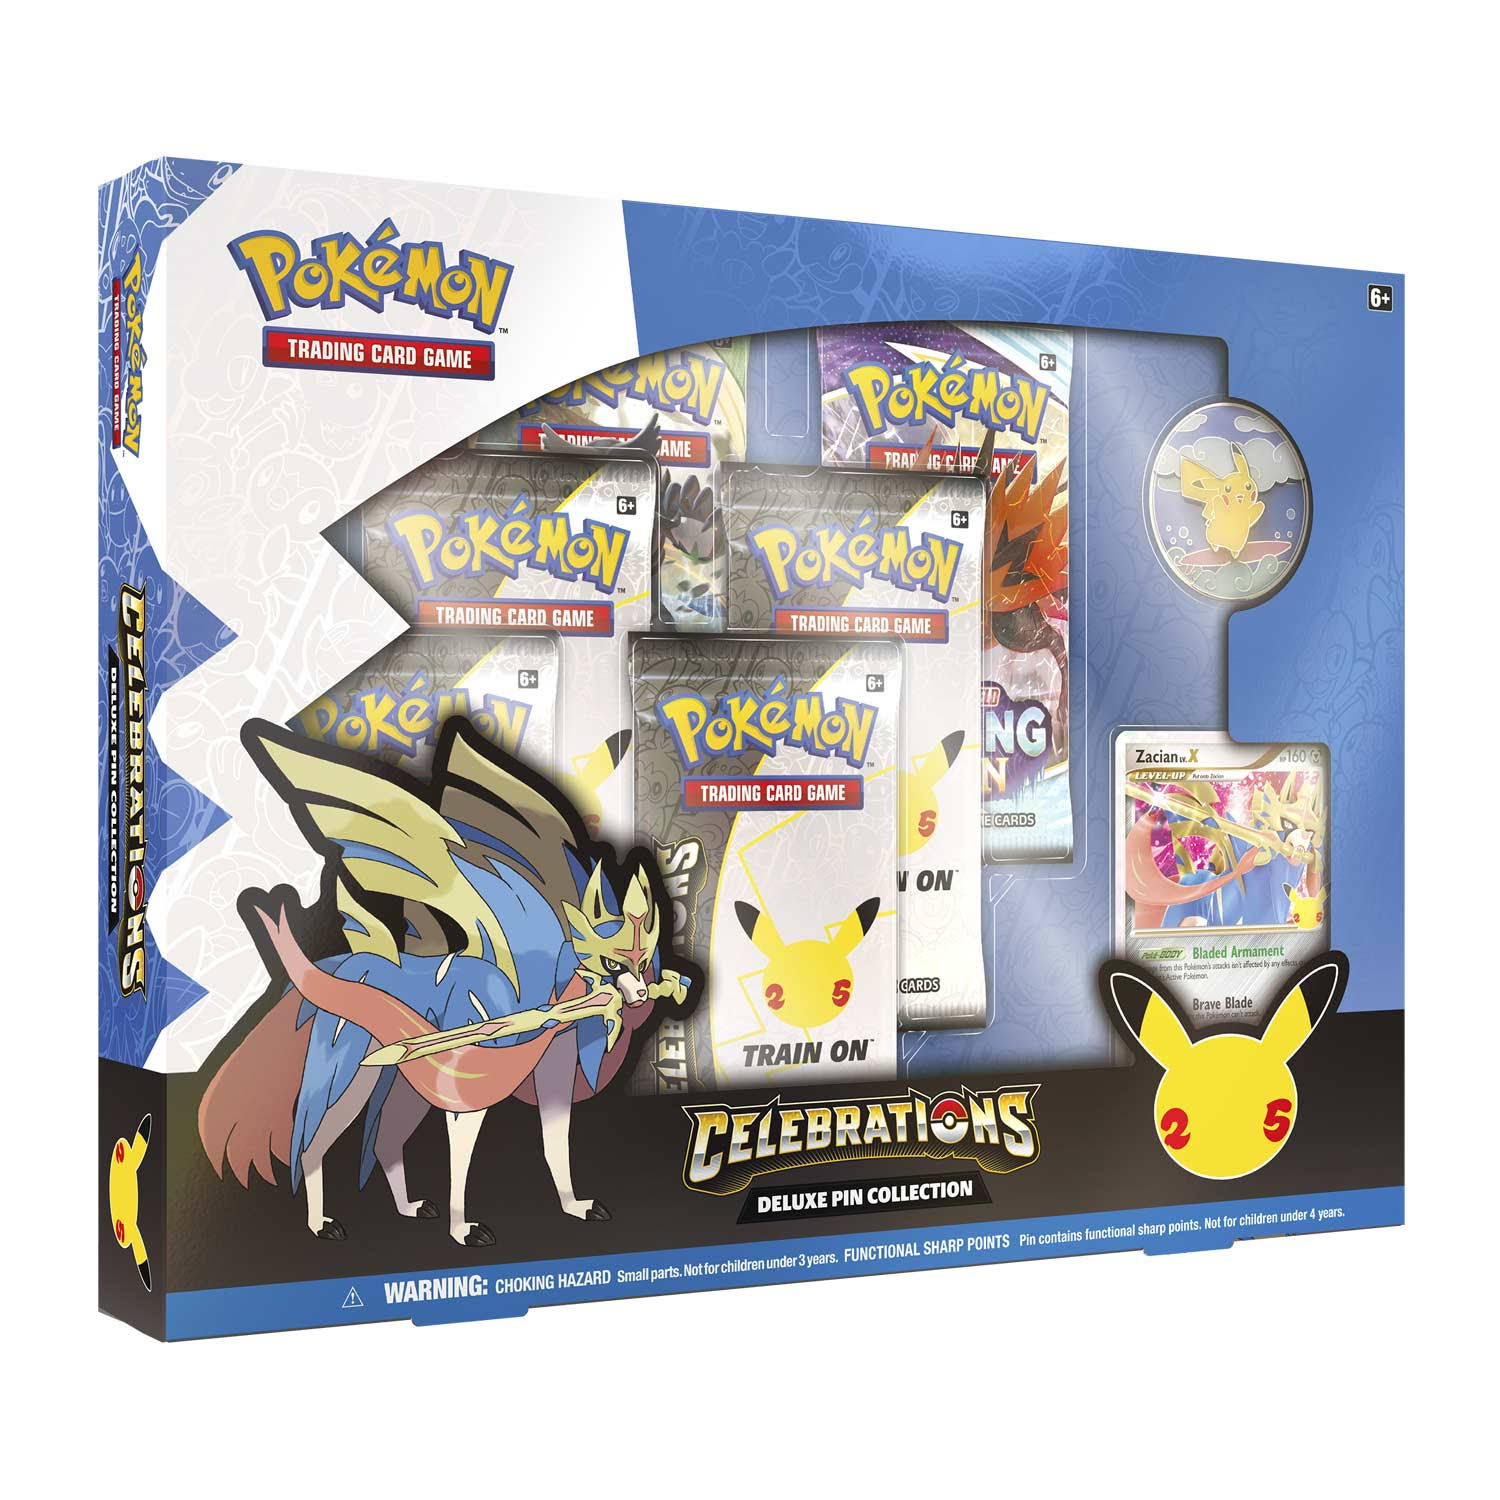 Pokemon TCG: Celebrations Deluxe Pin Collection Box